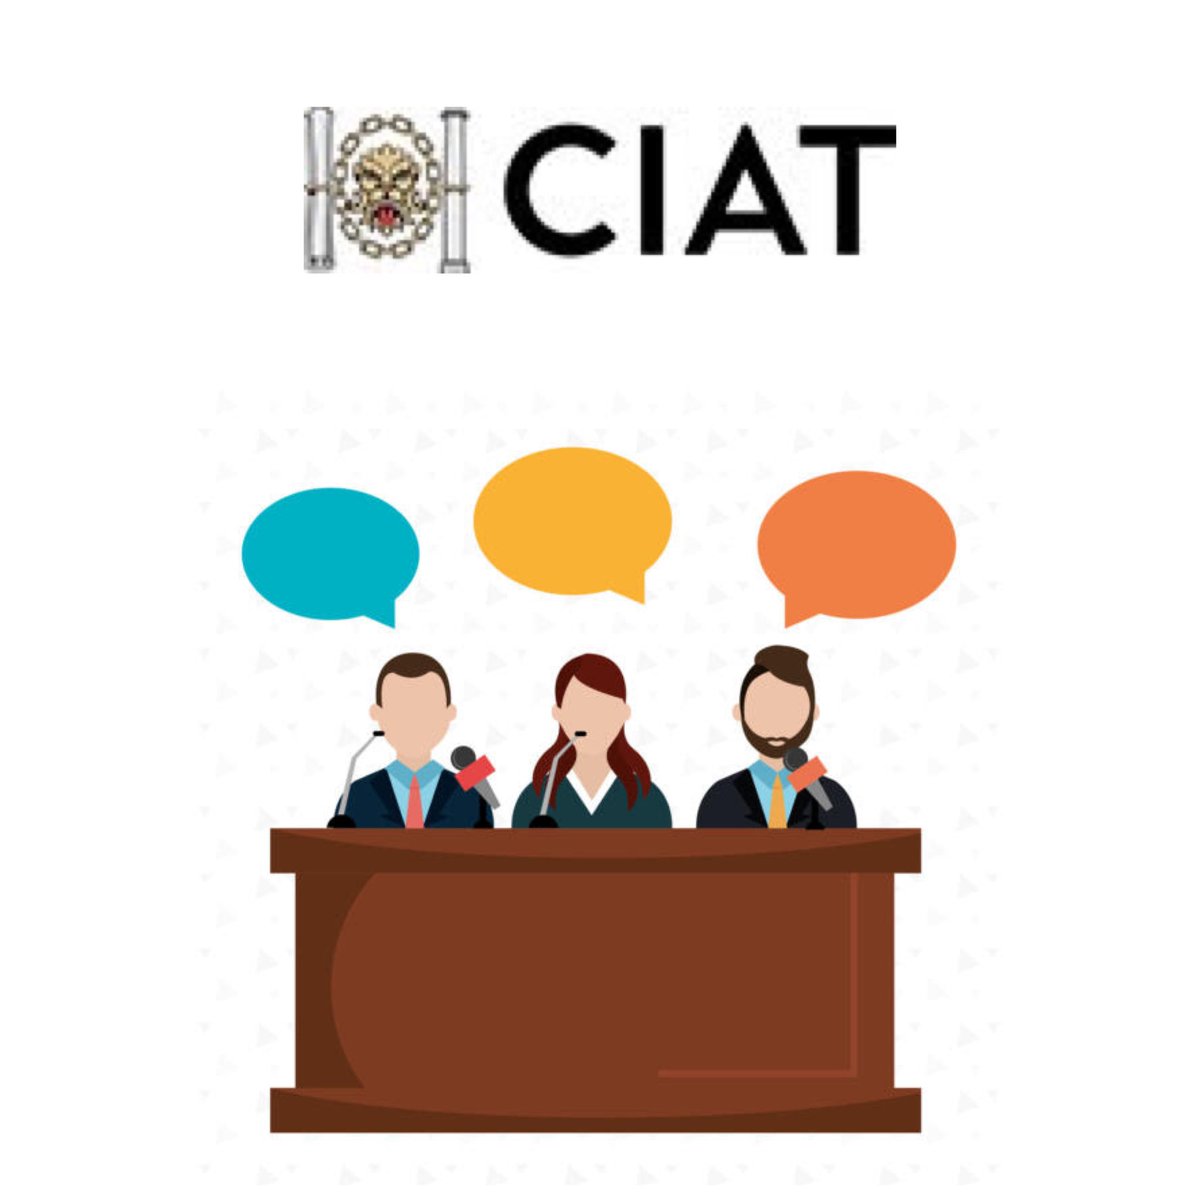 At the @CIATechnologist Council meeting,the following were elected as #HonoraryOfficers:
-Honorary Secretary
Gordon J Souter MCIAT
-Vice-President Education
Carl Mills FCIAT 
-Vice-President Practice
Dan Clements MCIAT
Congratulations to everyone &to our very own @1CarlMills!🎉🎊